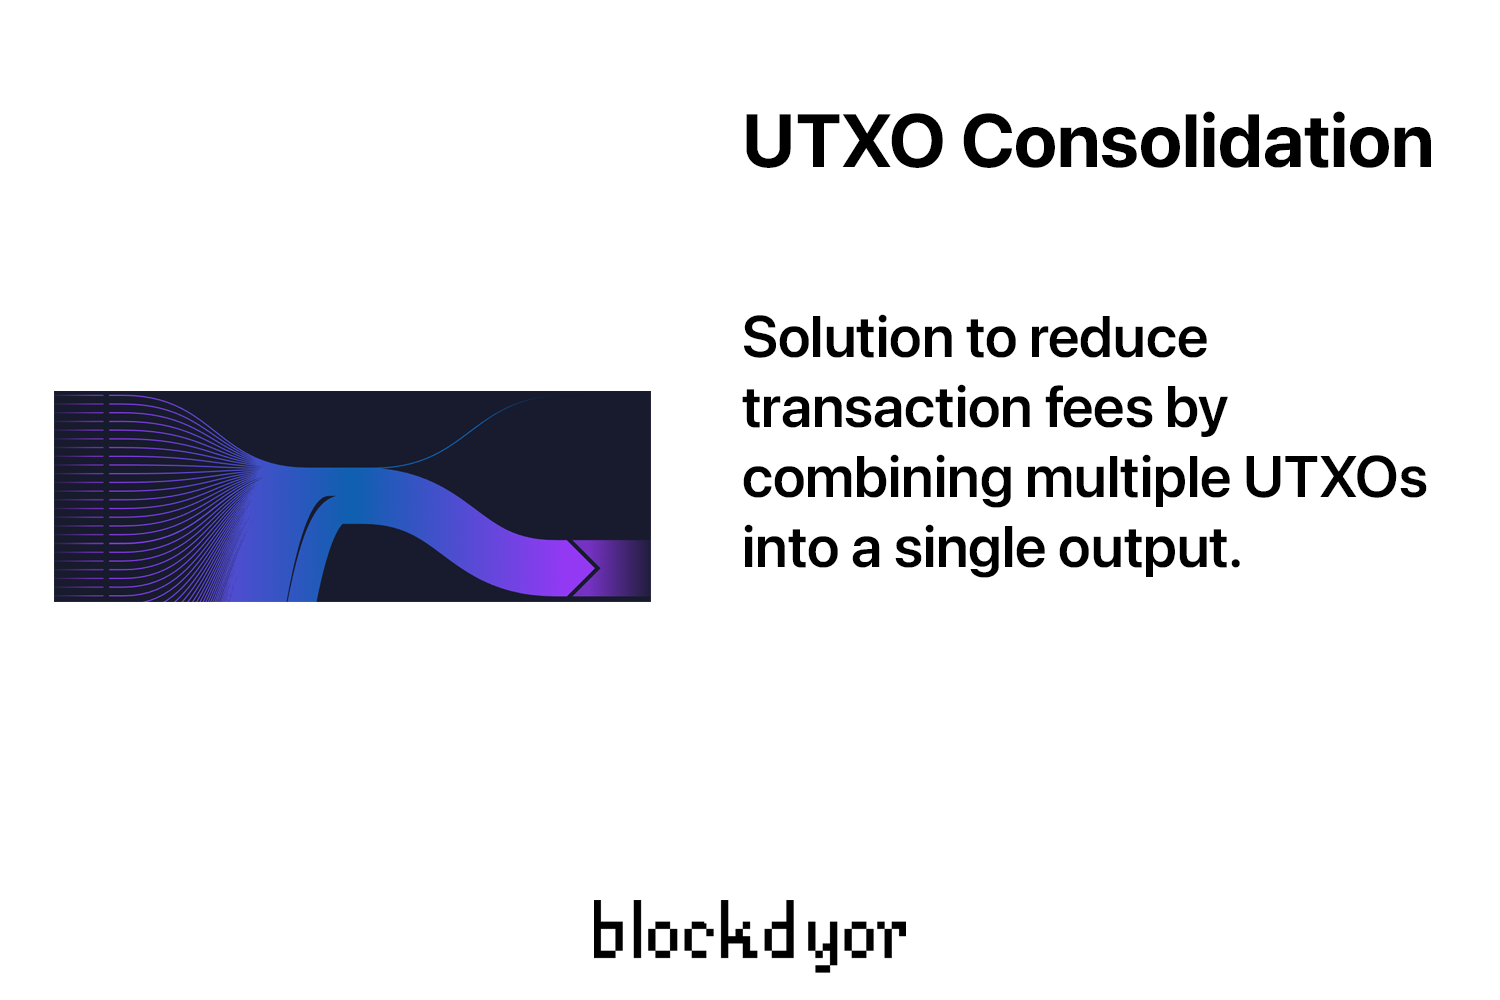 UTXO Consolidation Overview